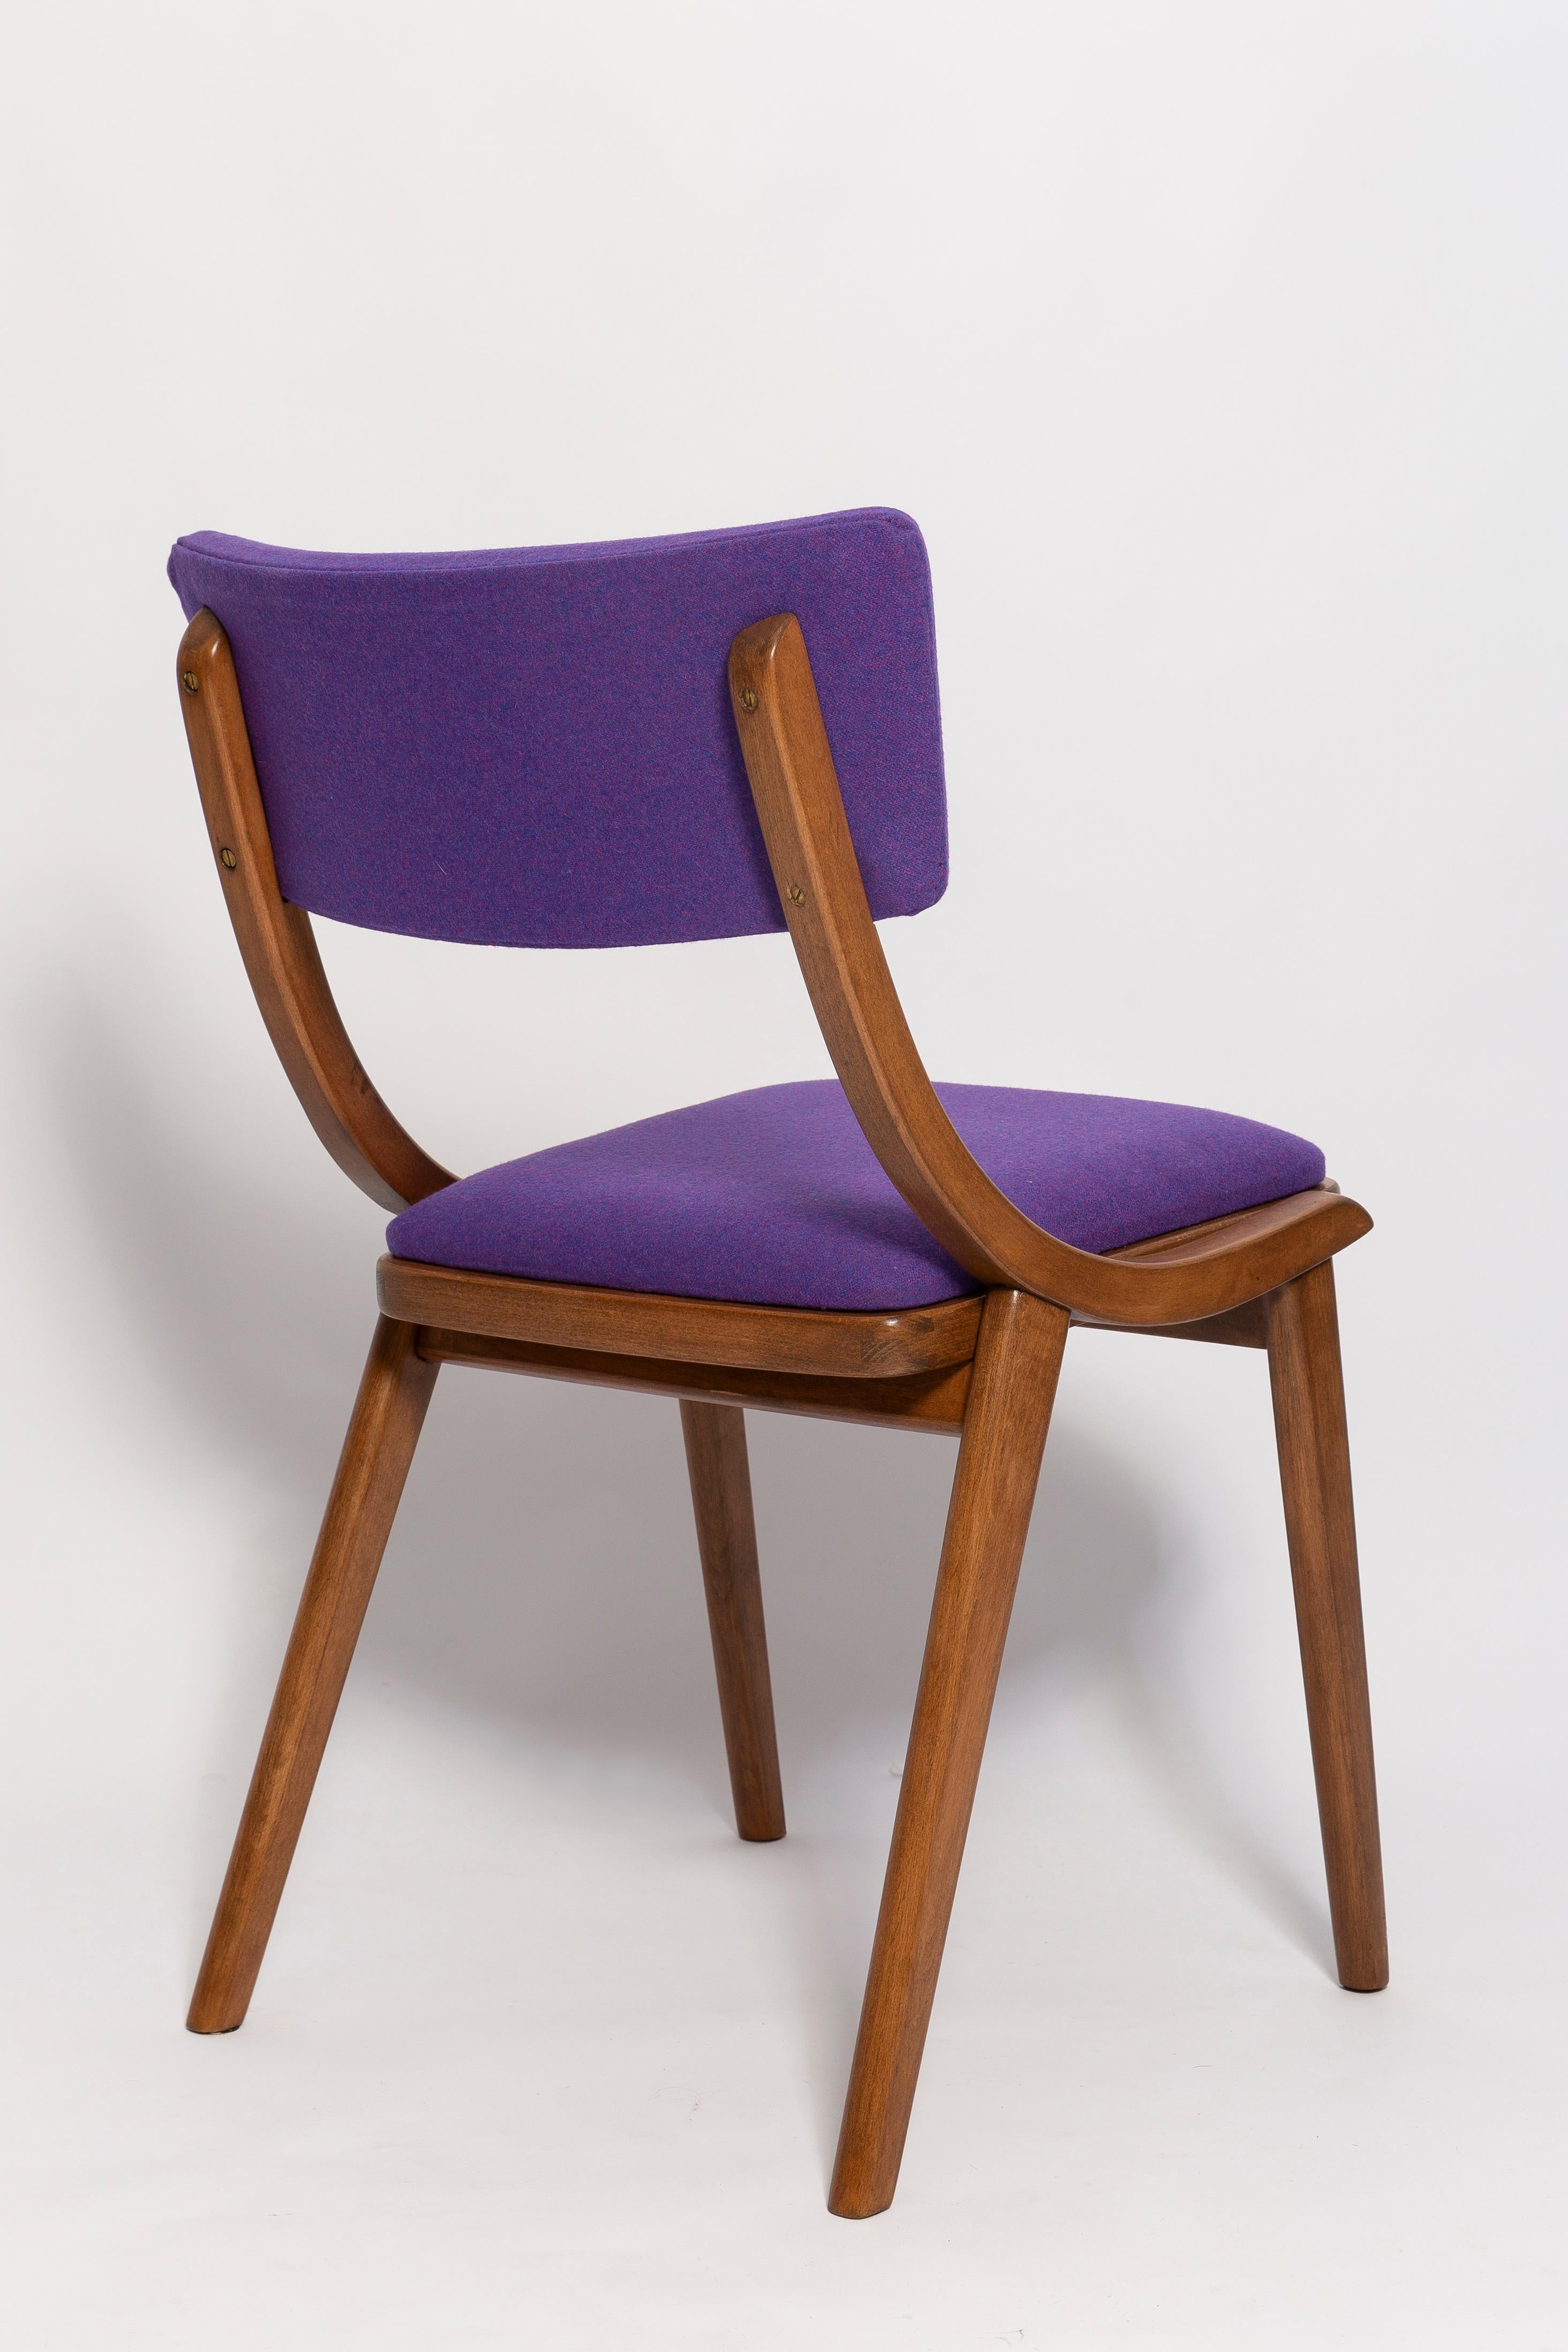 20th Century Six Mid Century Modern Bumerang Chairs, Purple Violet Wool, Poland, 1960s For Sale